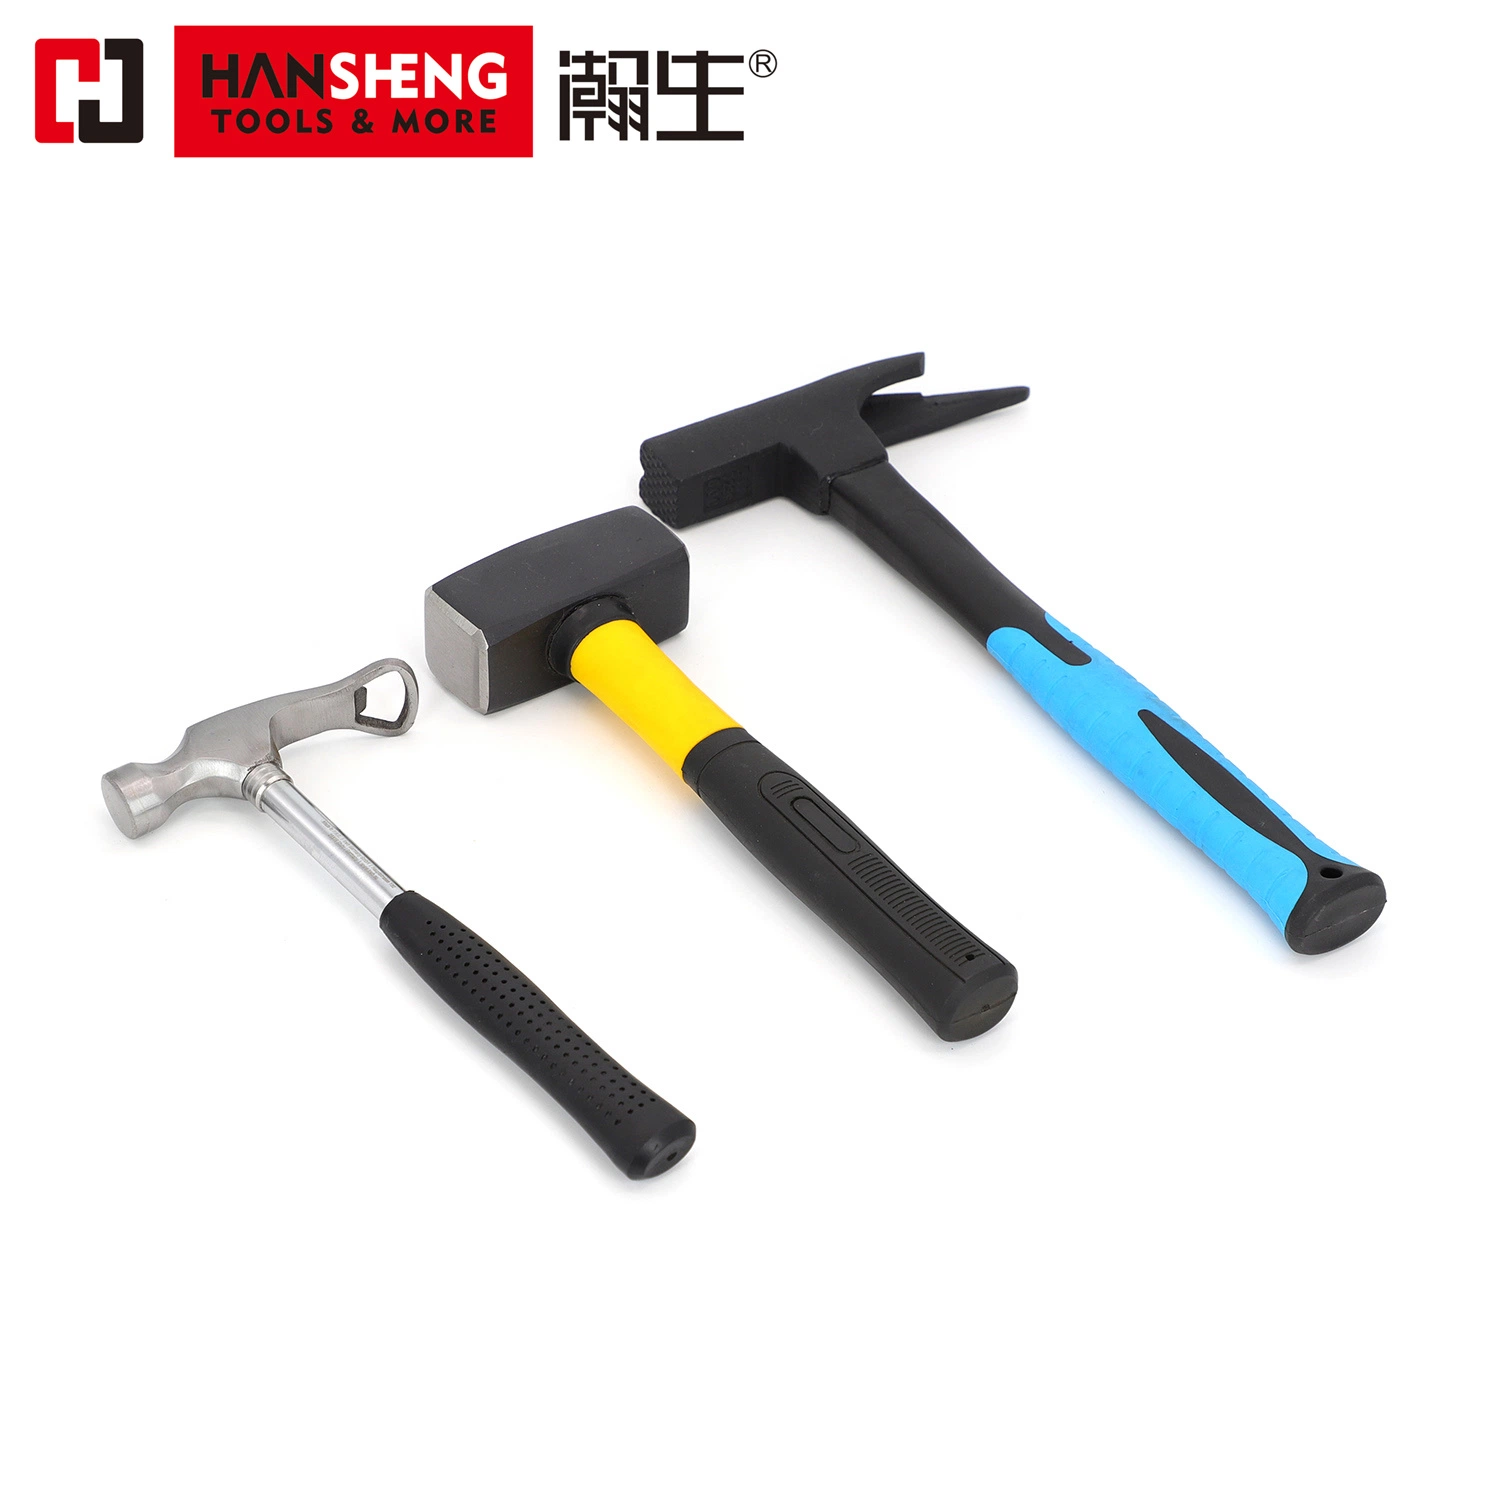 Professional Hand Tools, Hardware Tools, Made of CRV, High Carbon Steel